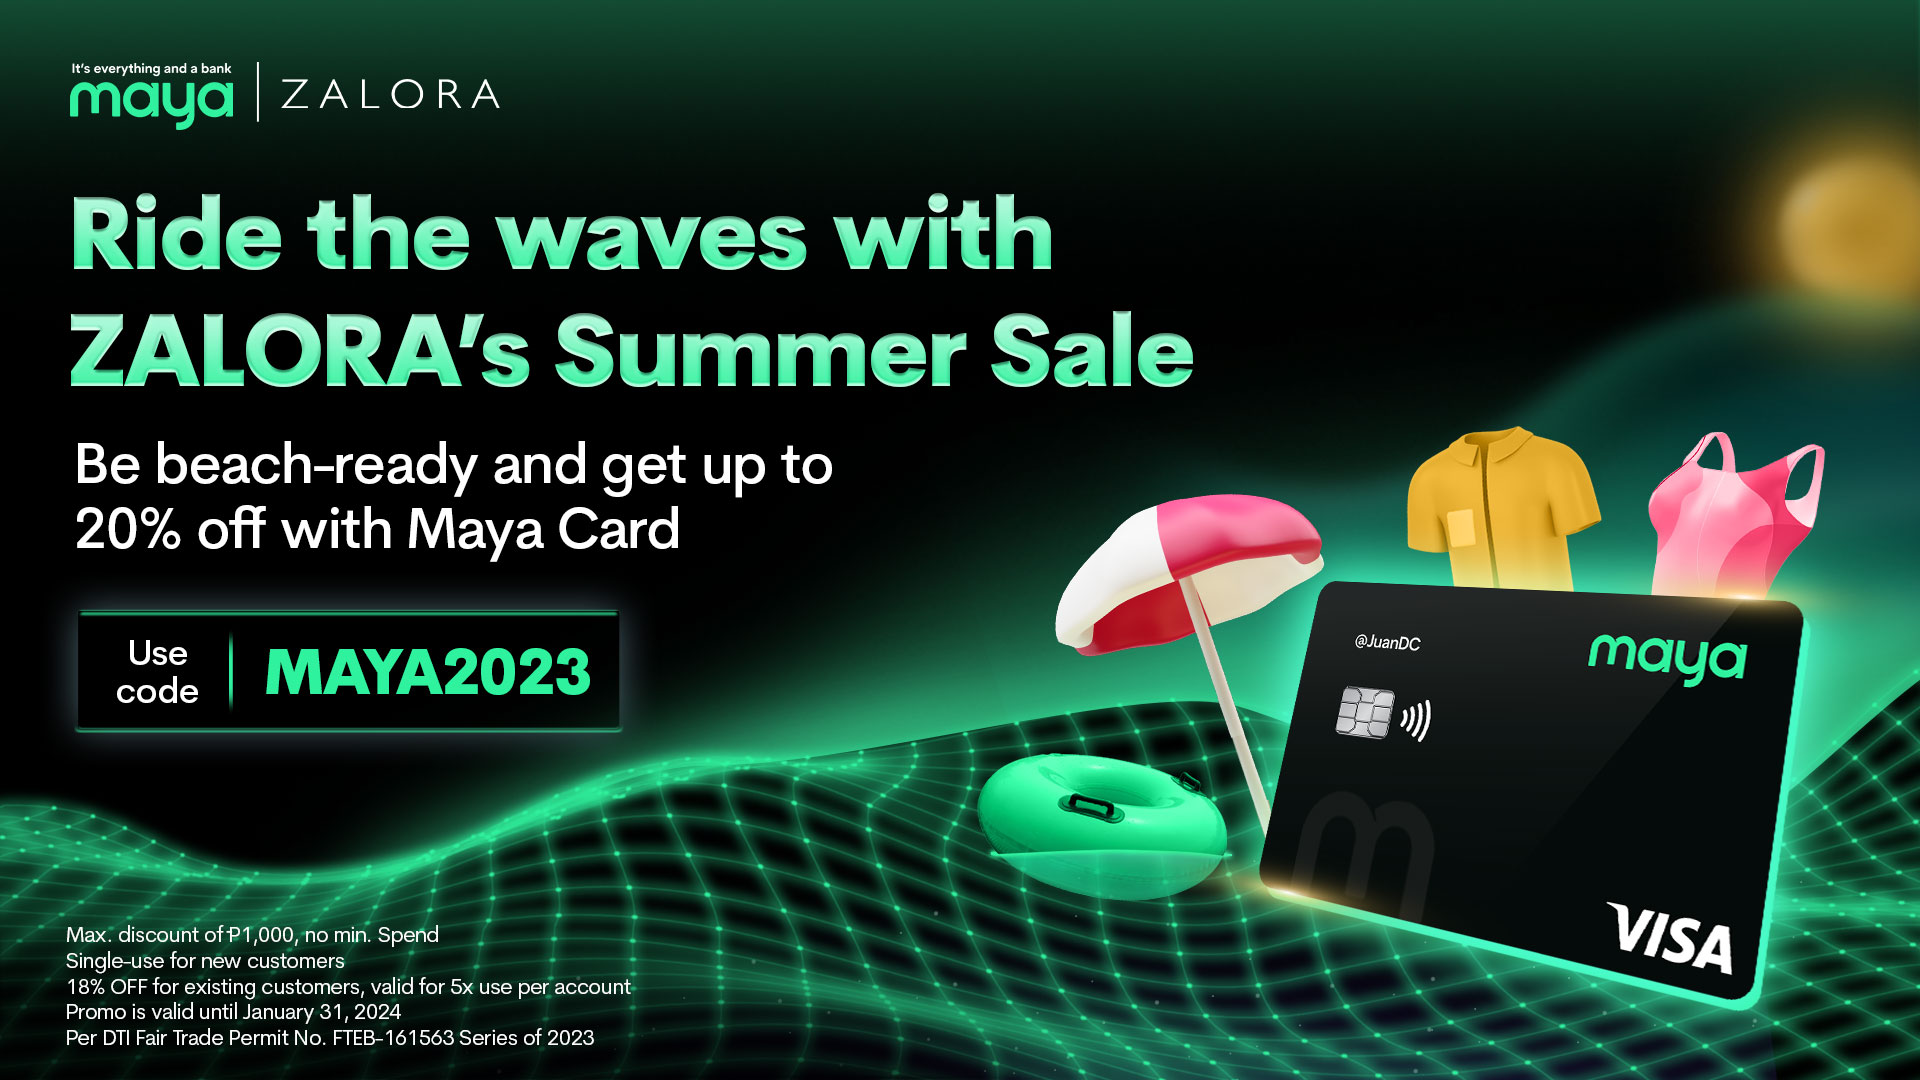 Enjoy up to 20% OFF on Zalora purchase with your Maya Card!